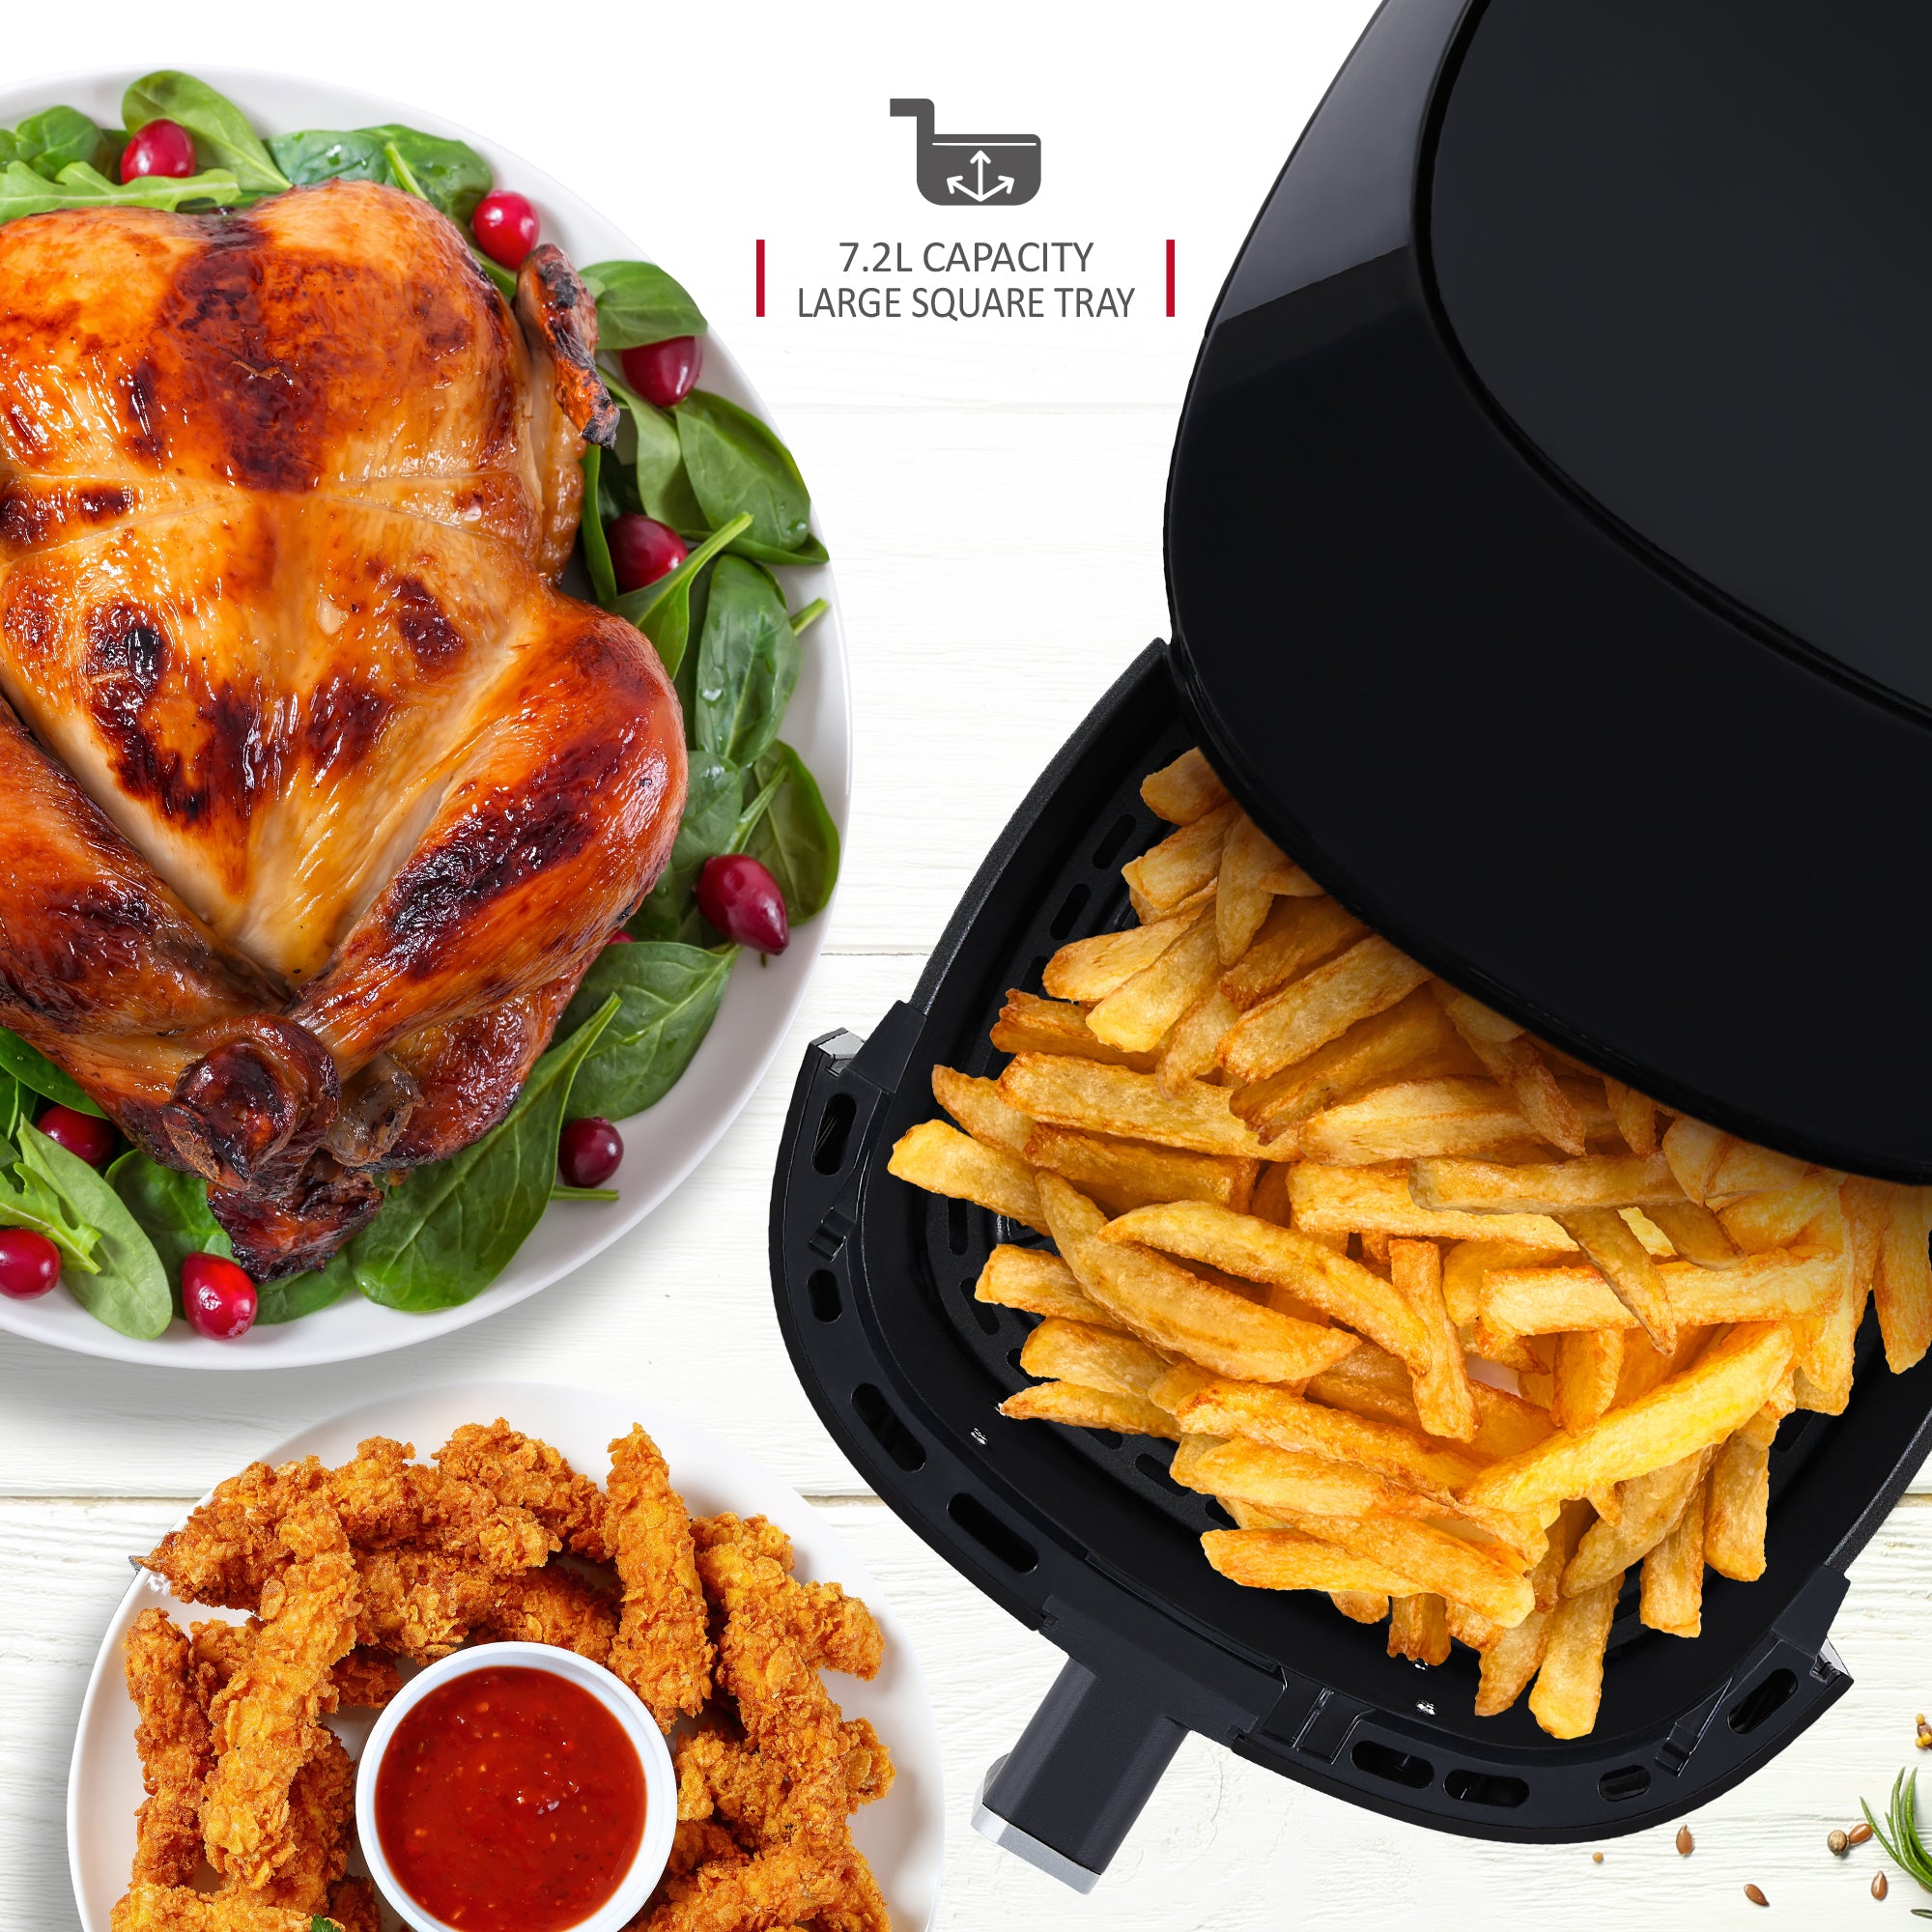 NETTA Digital Air Fryer with Drawer and Detachable Non-Stick Frying Tray